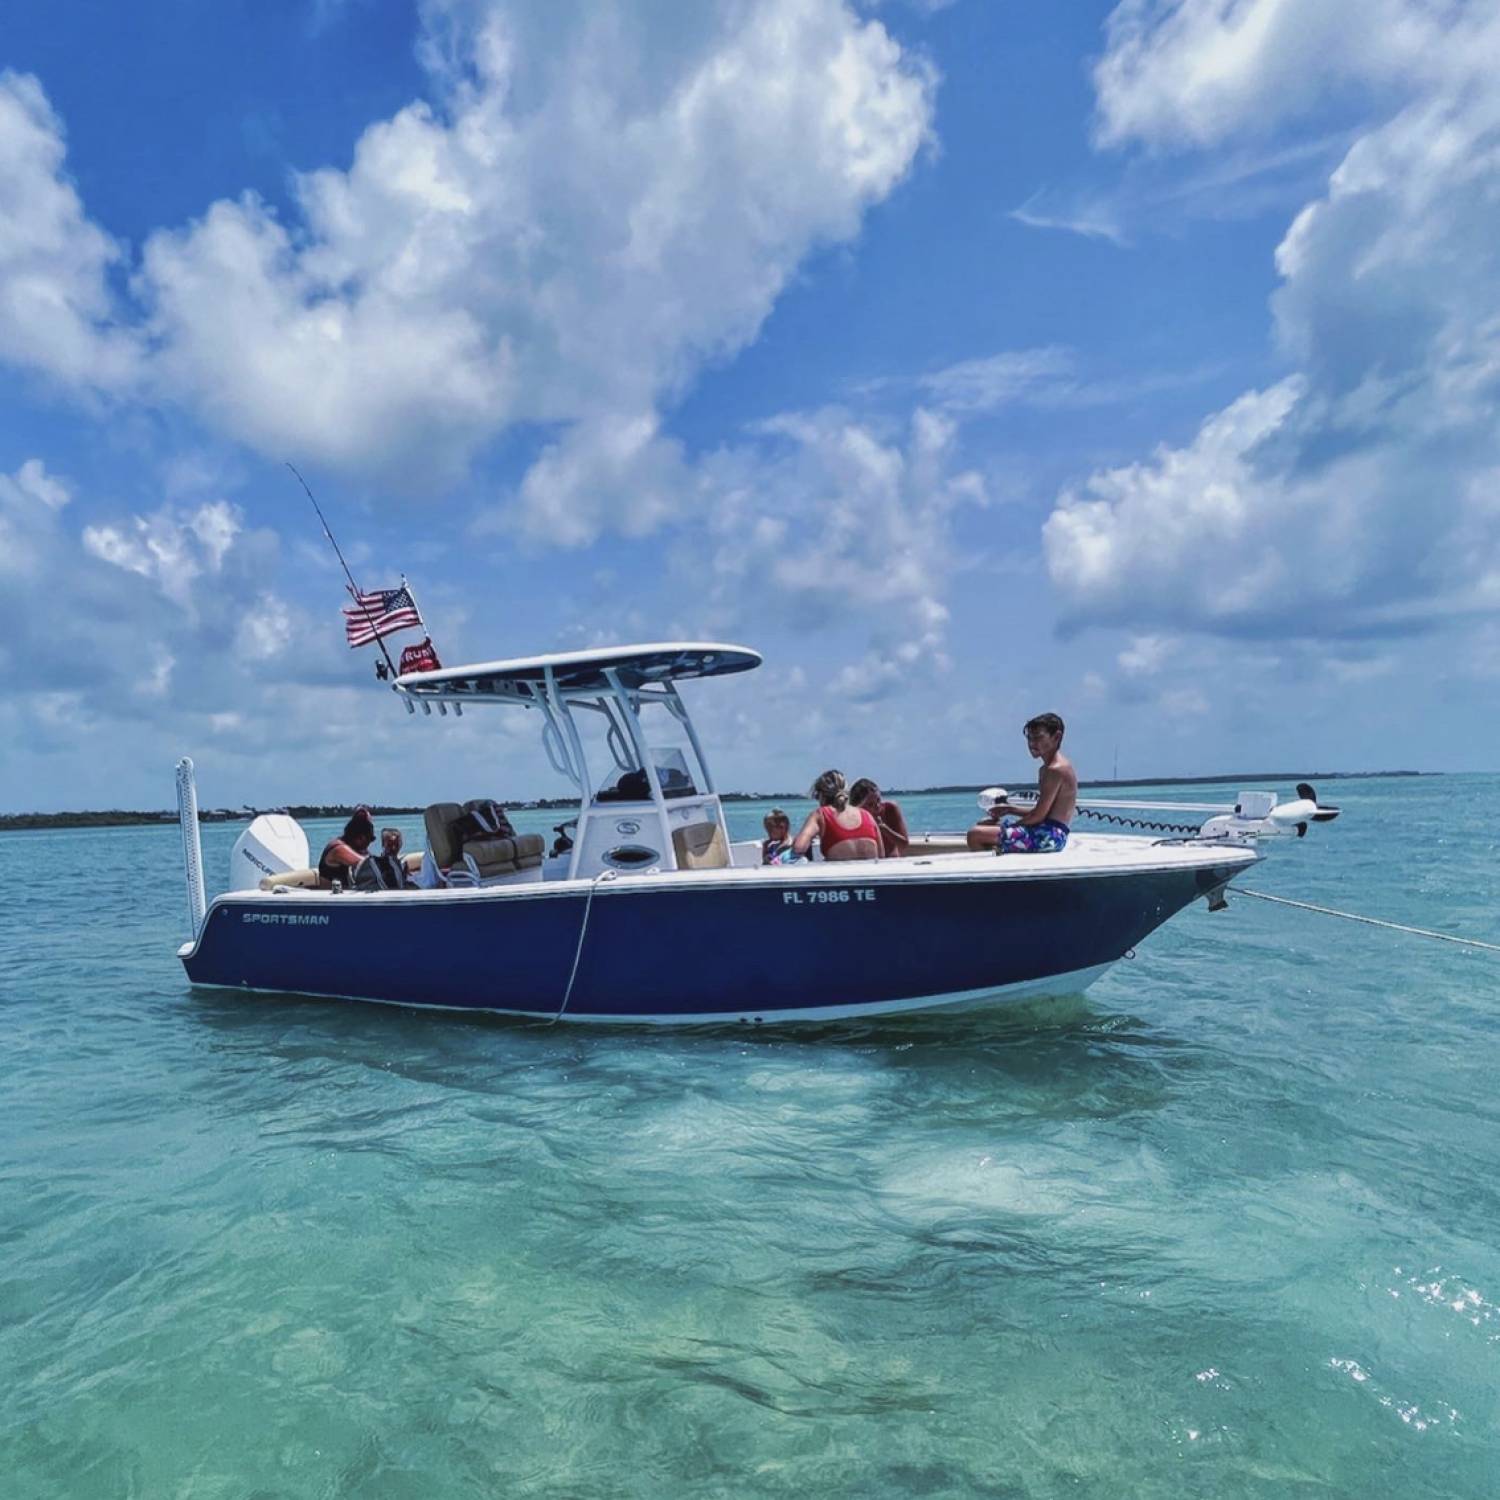 Title: BOAT DAY - On board their Sportsman Open 232 Center Console - Location: Islamorada, FL. Participating in the Photo Contest #SportsmanMarch2023